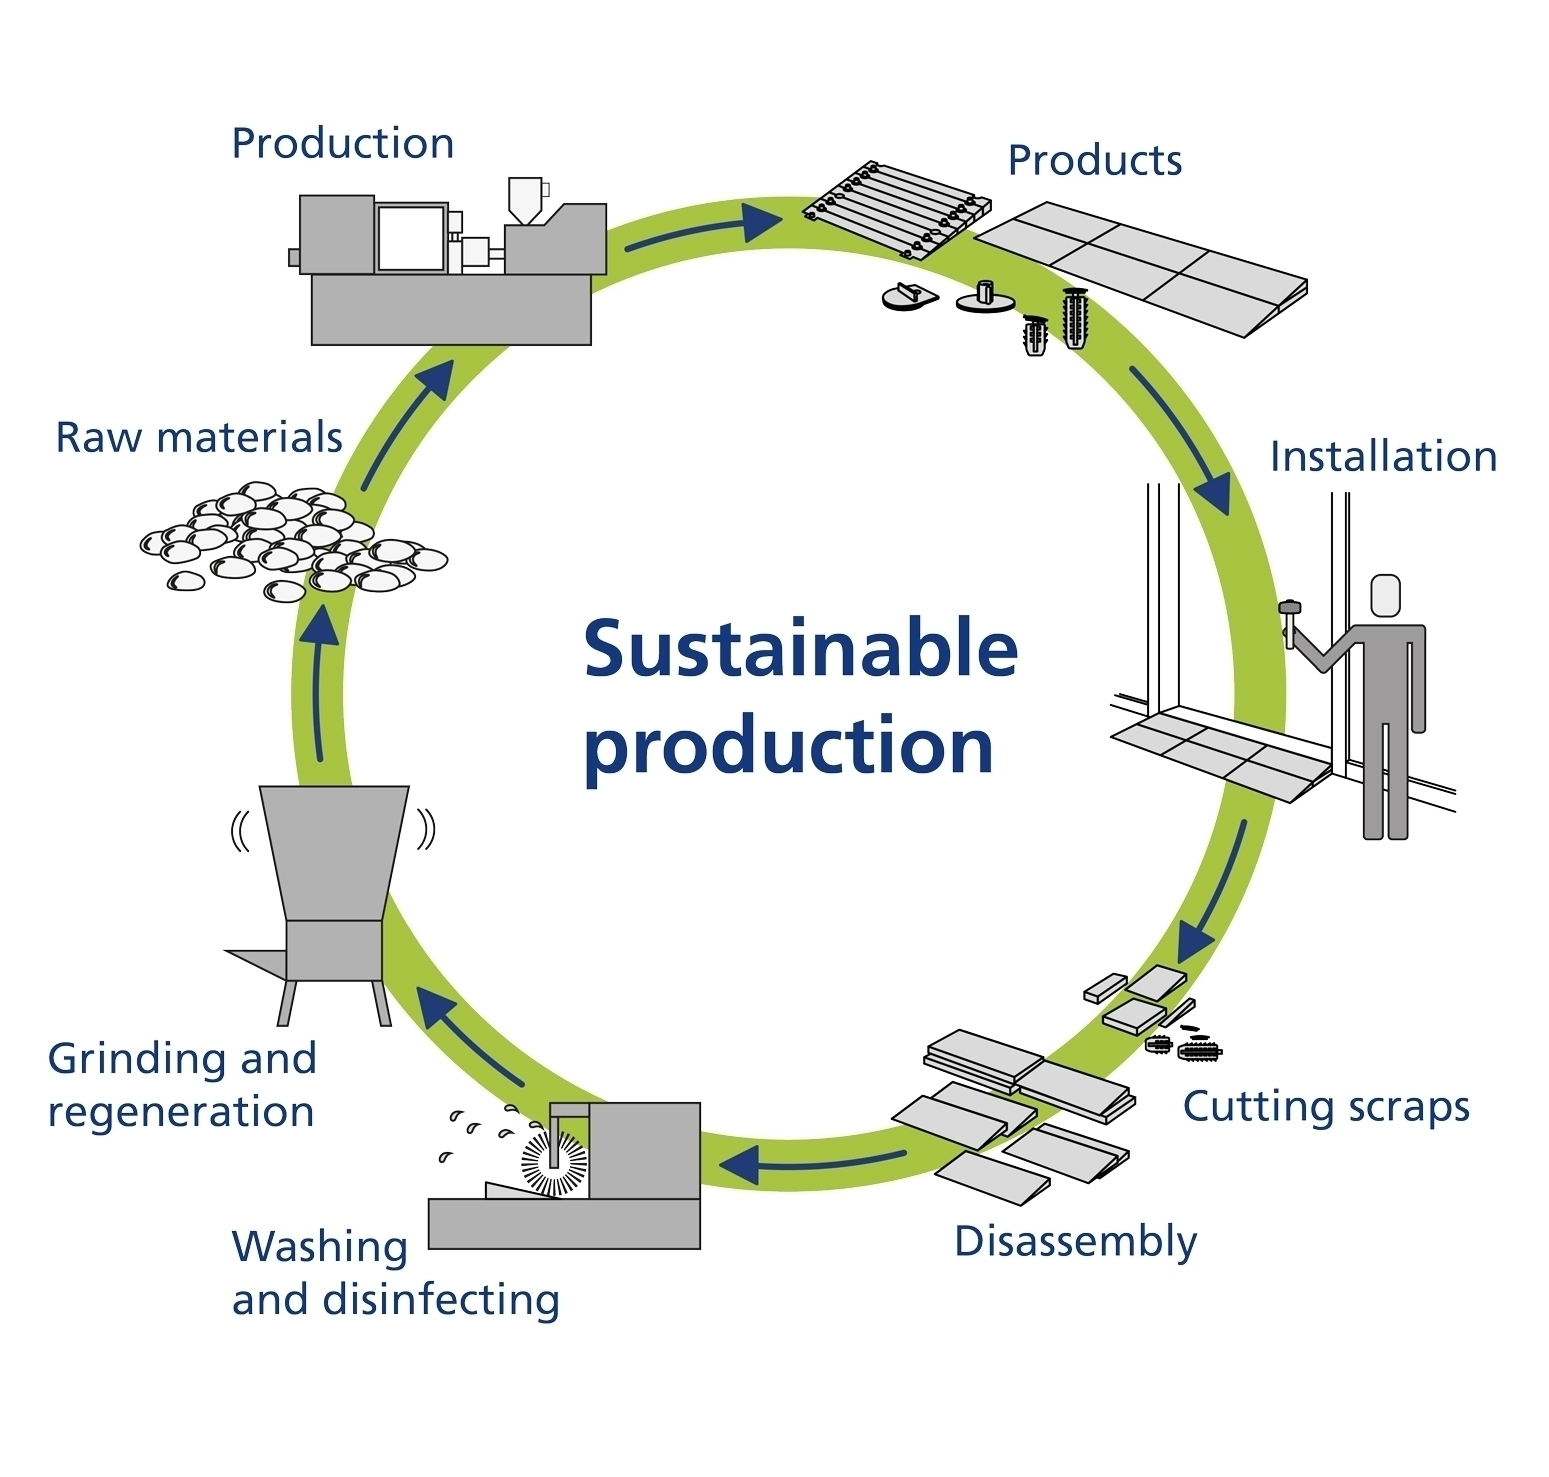 Sustainable Danish production with non-toxic materials